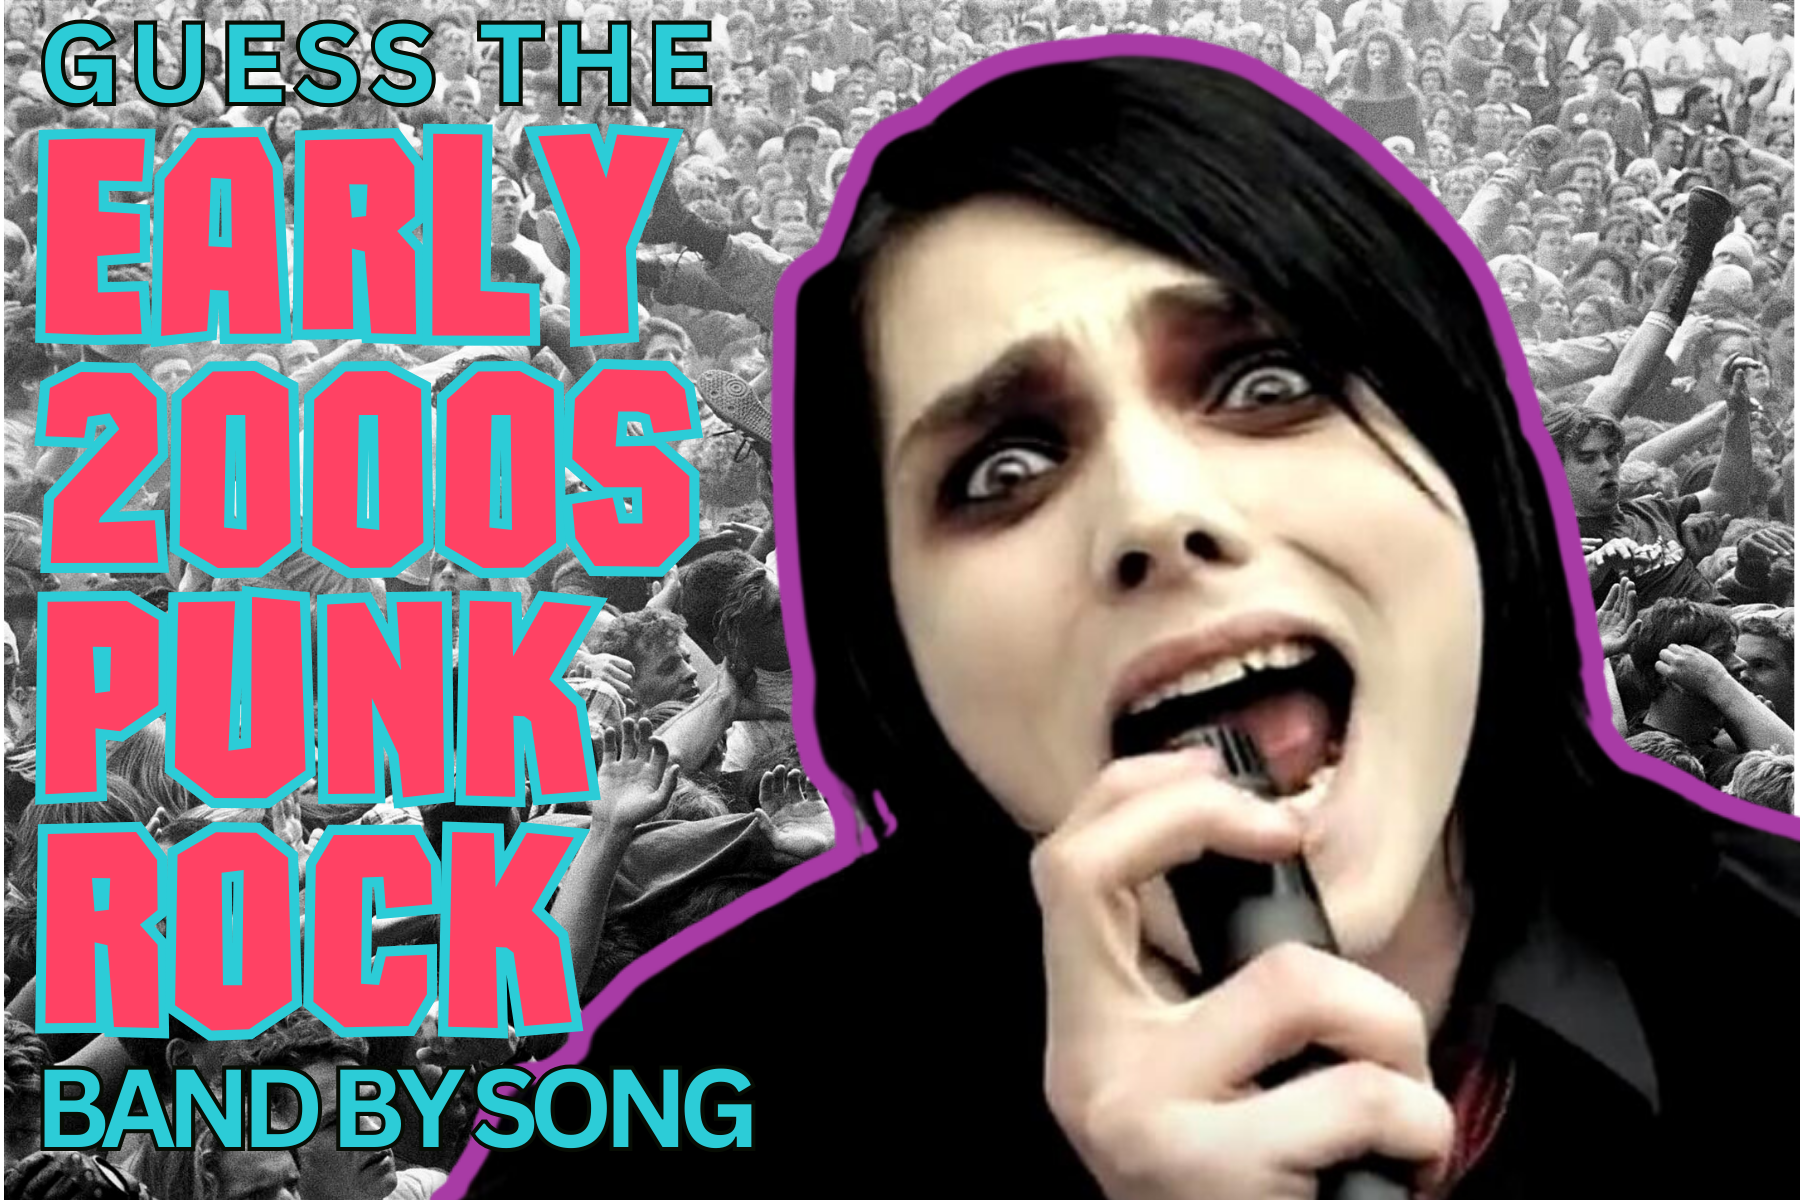 Can You Guess the Early Millennium Punk Rock Band by the Song Lyrics?